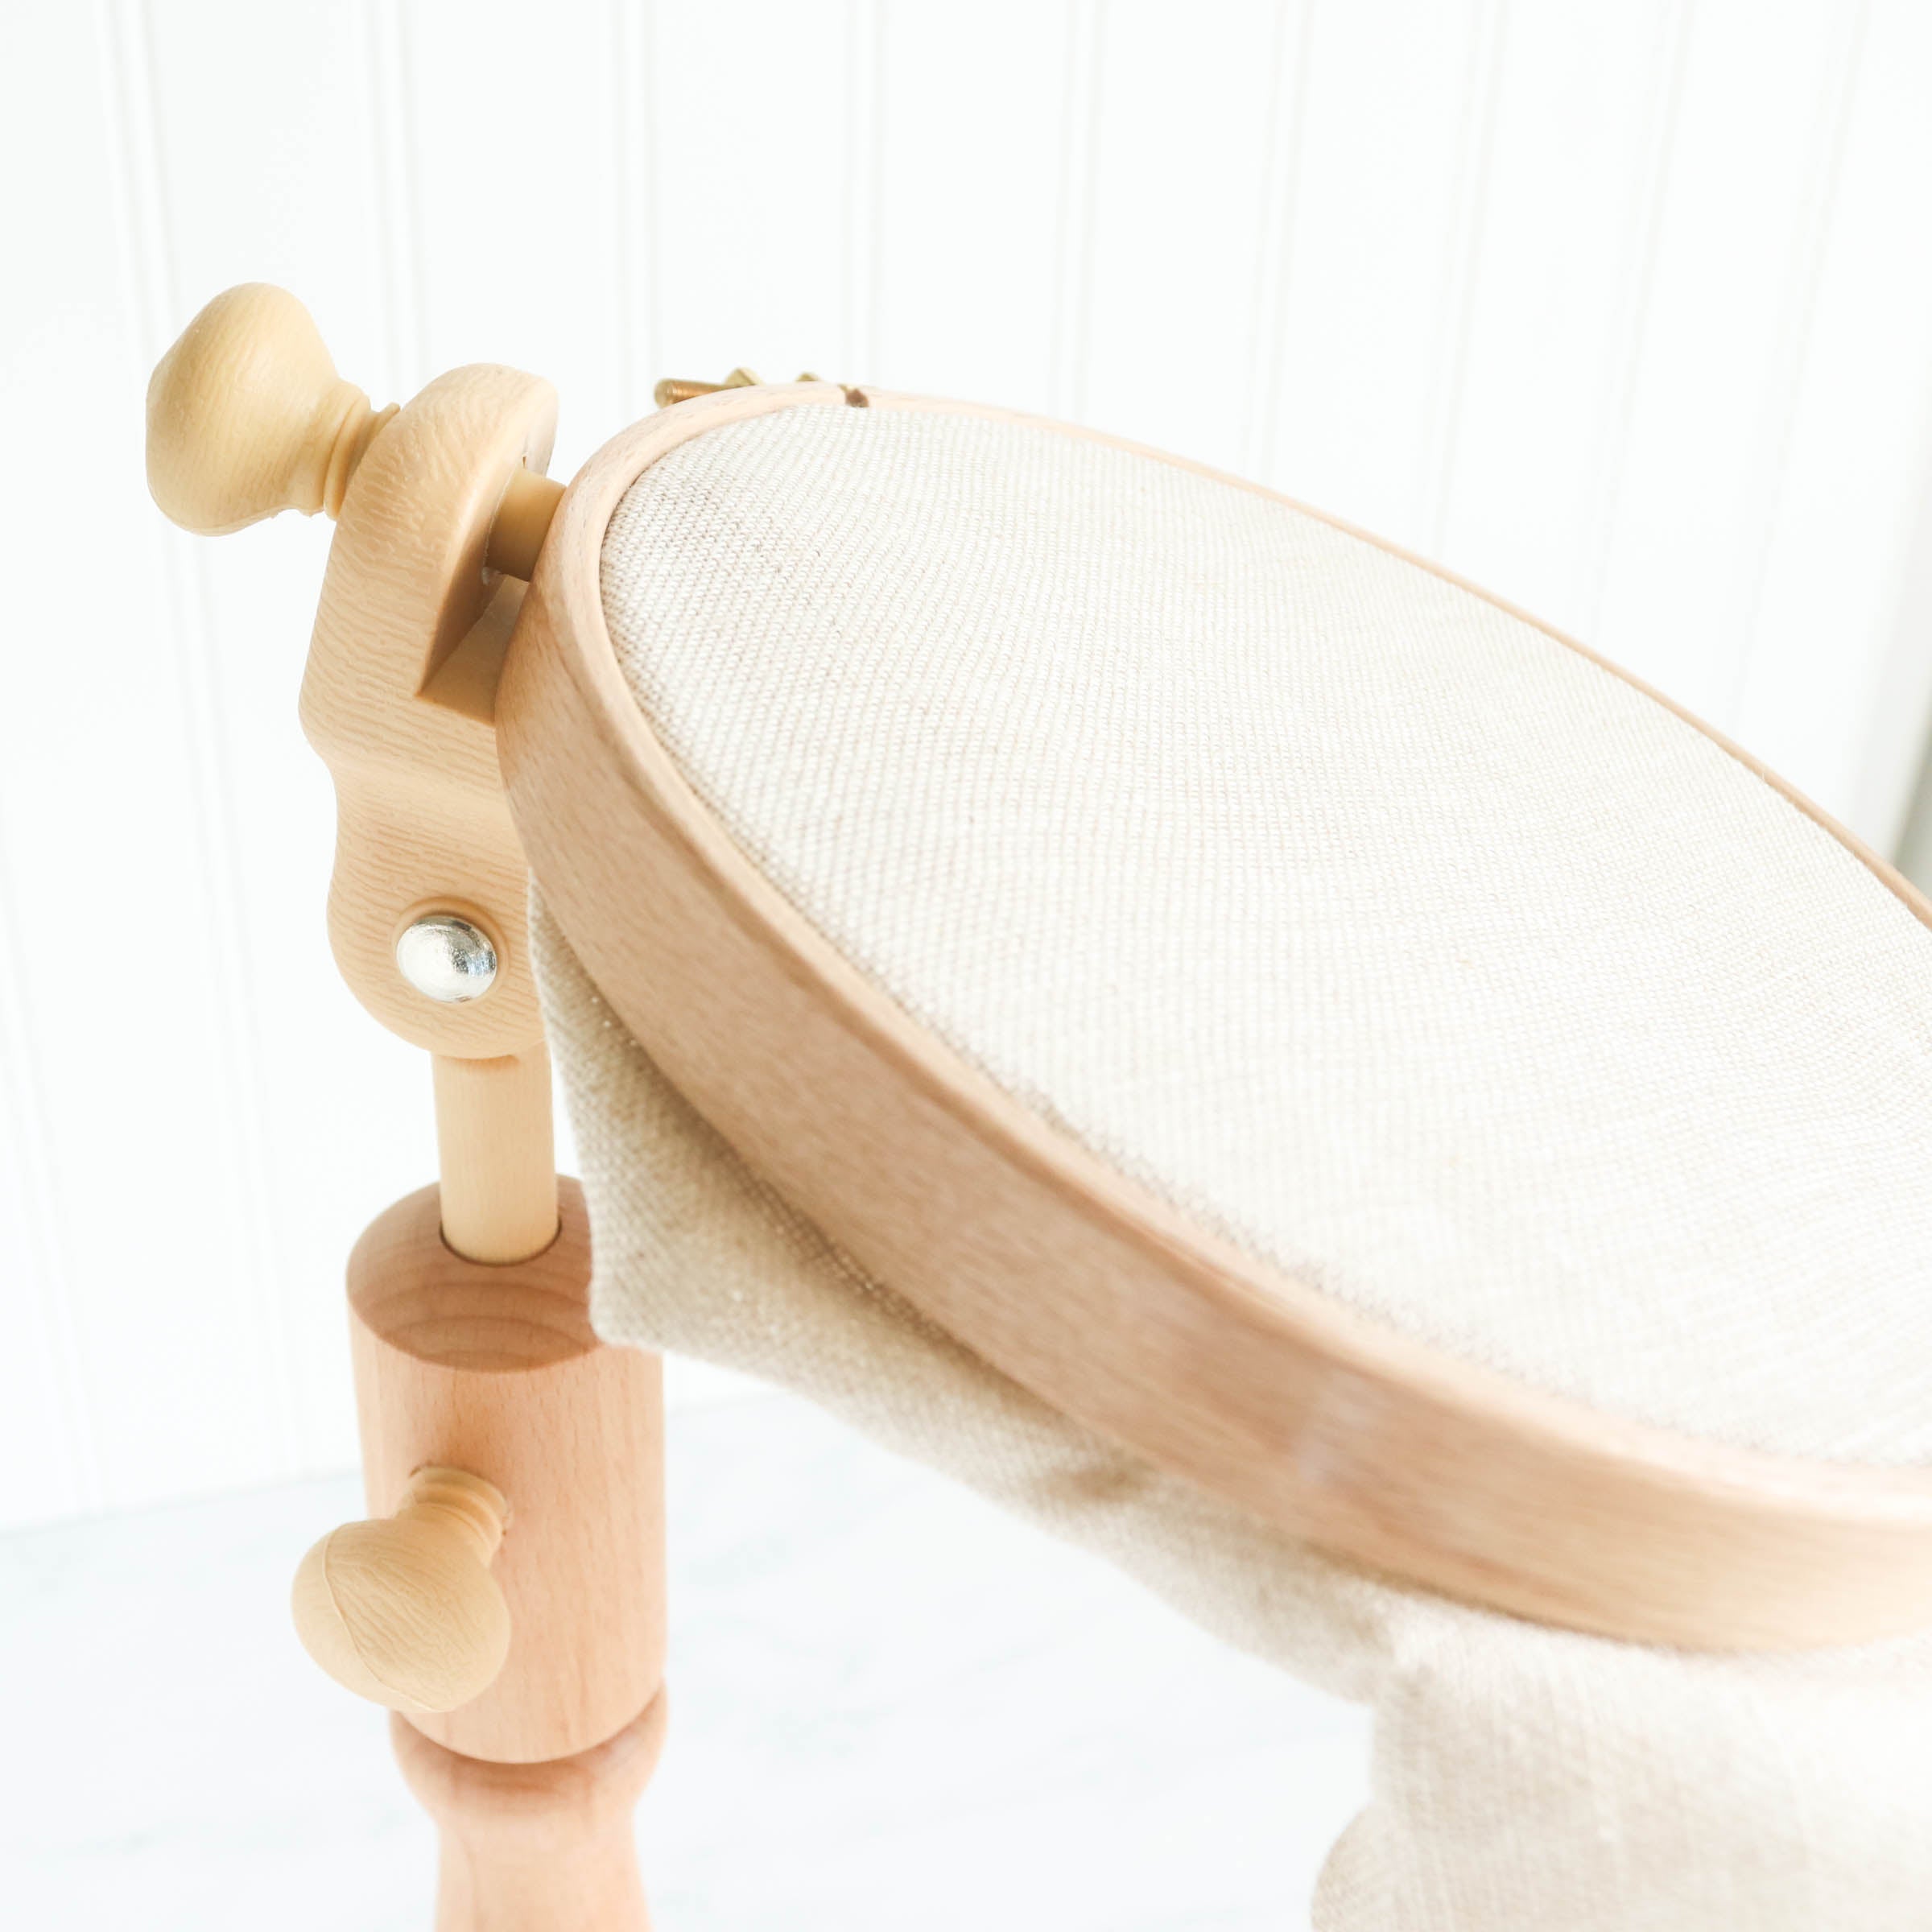 Adjustable Embroidery Hoop Table and Seat Stand - Stitched Modern